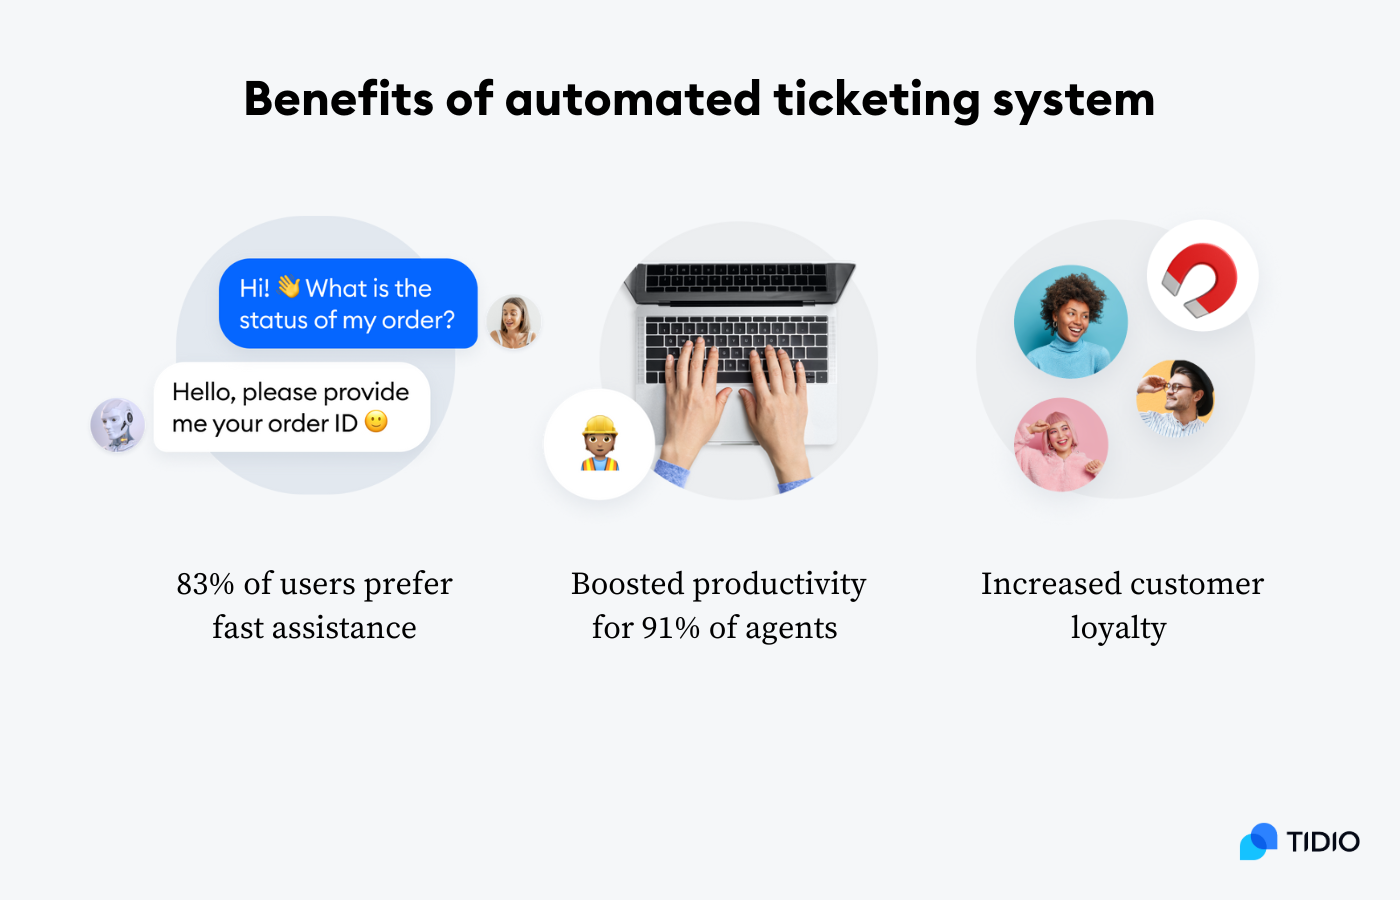 Benefits of using automated ticketing system software on image